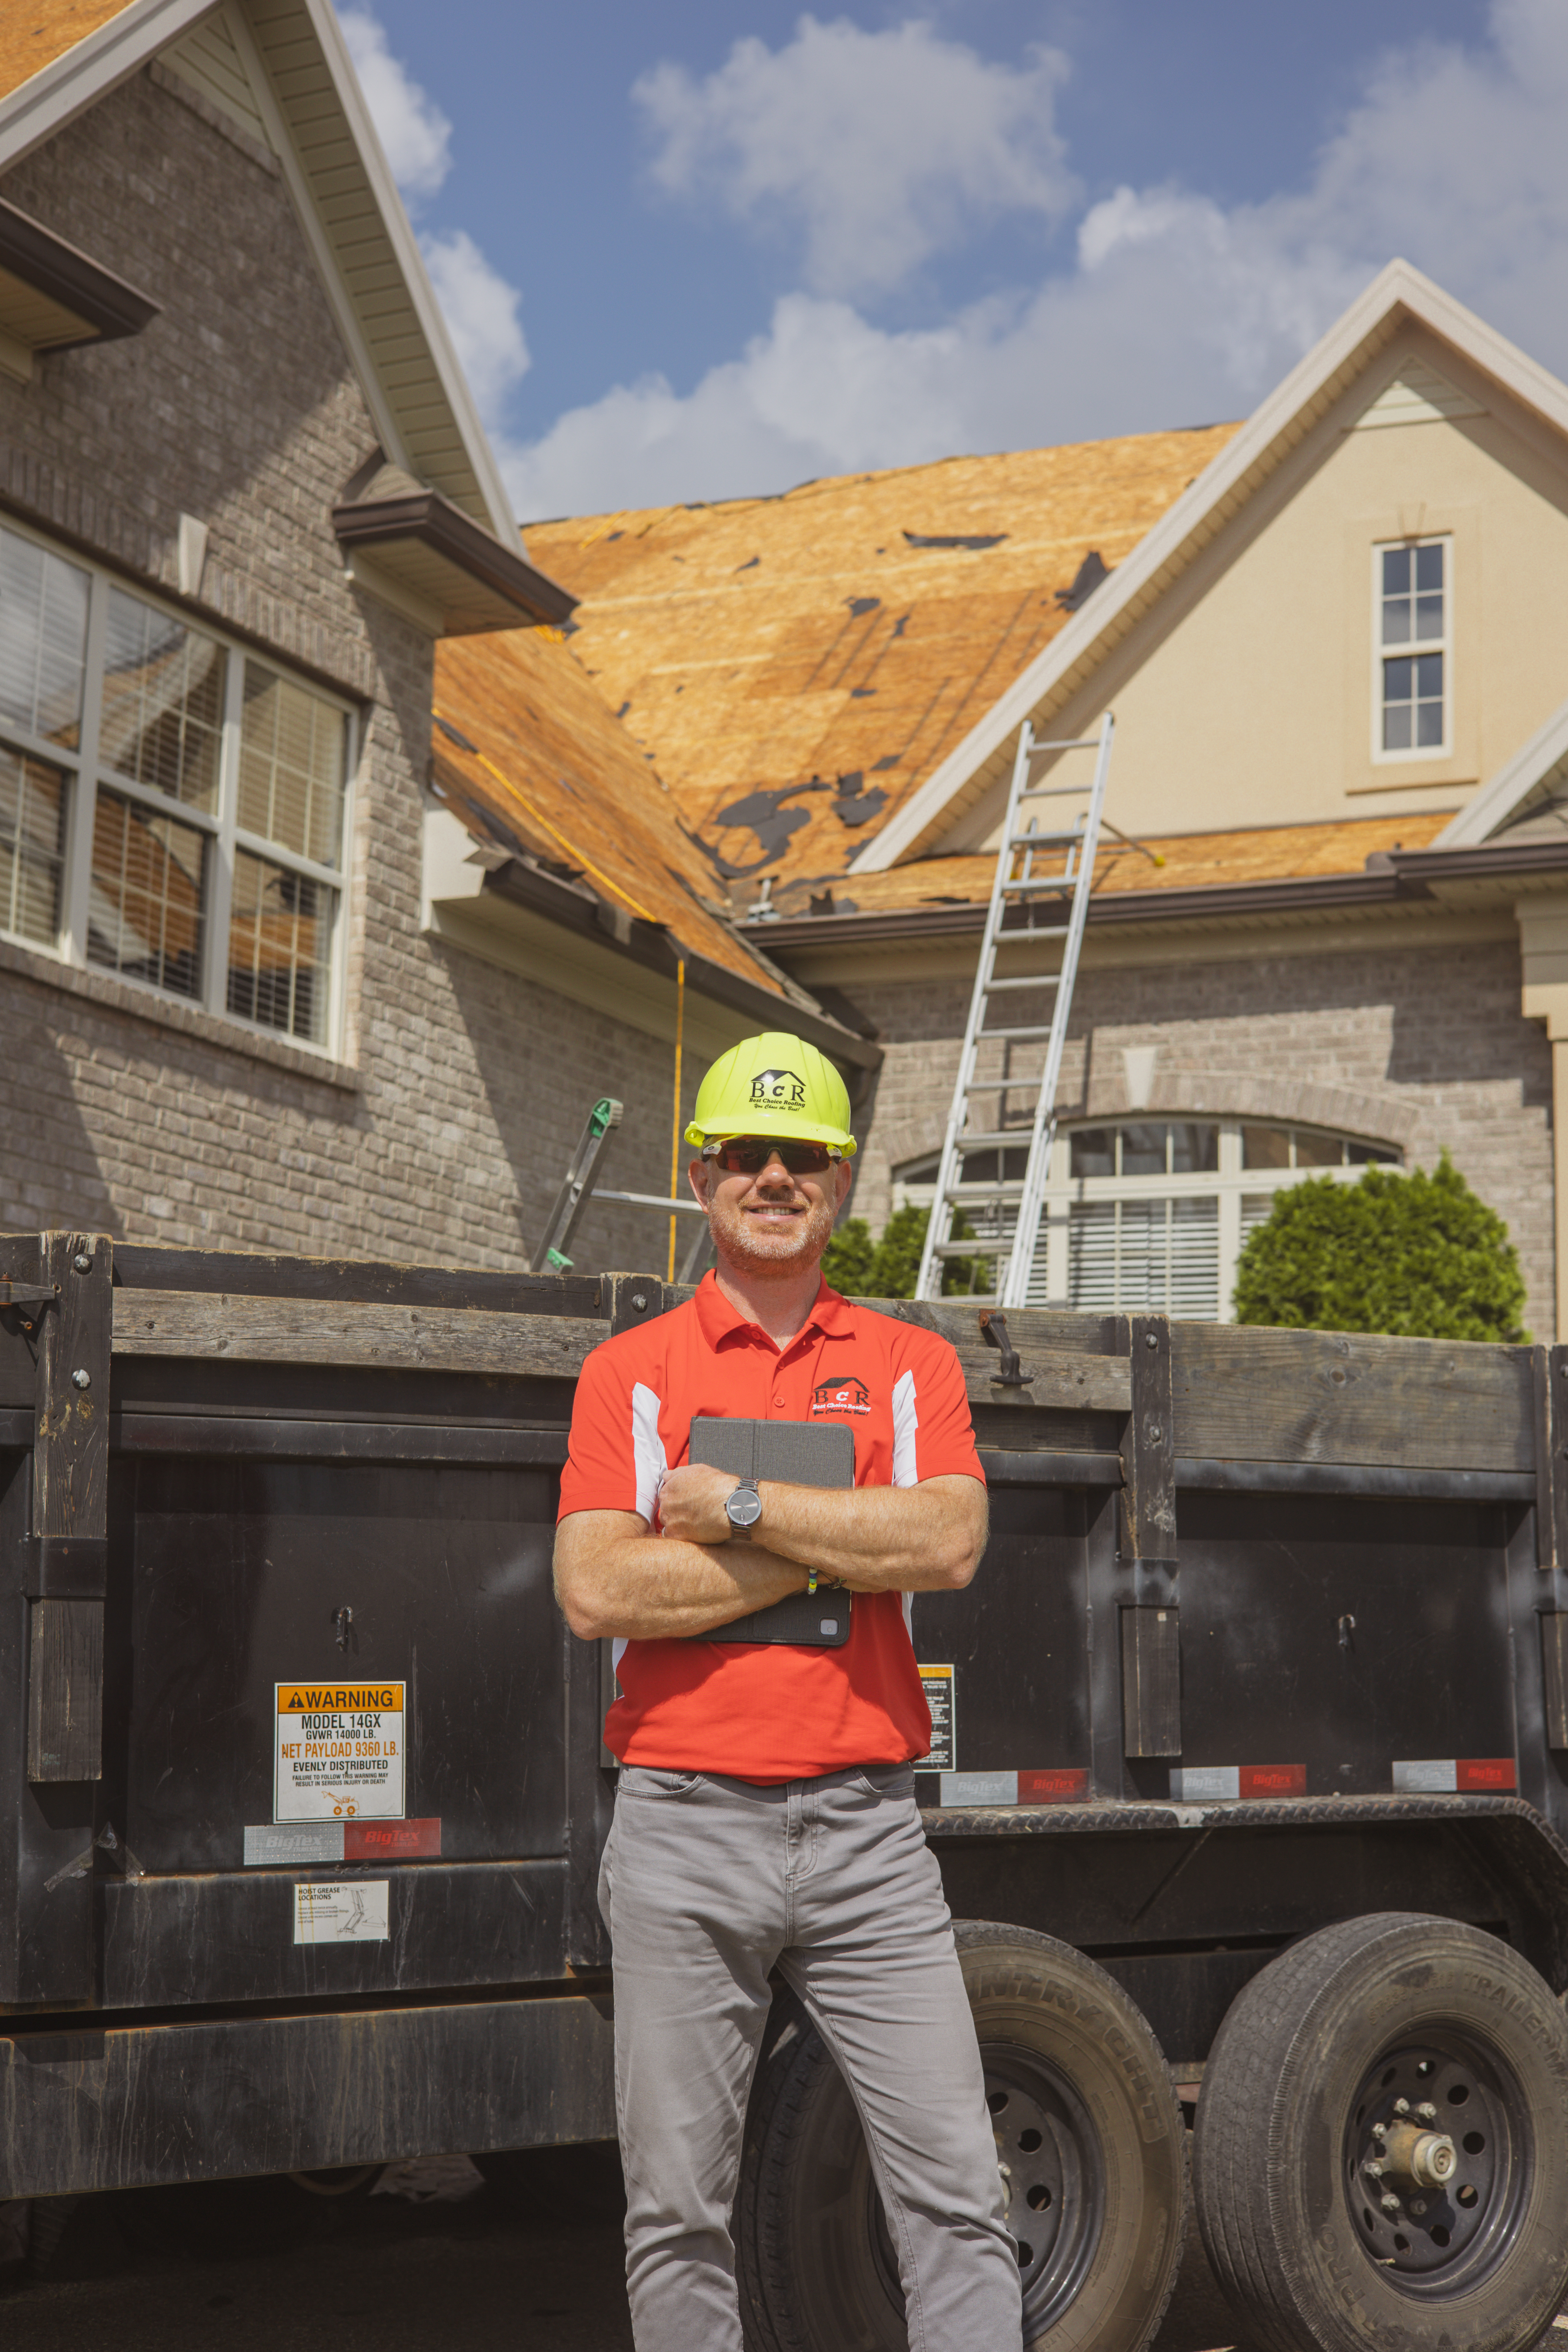 Roof Replacement & Free Inspections - Best Choice Roofing